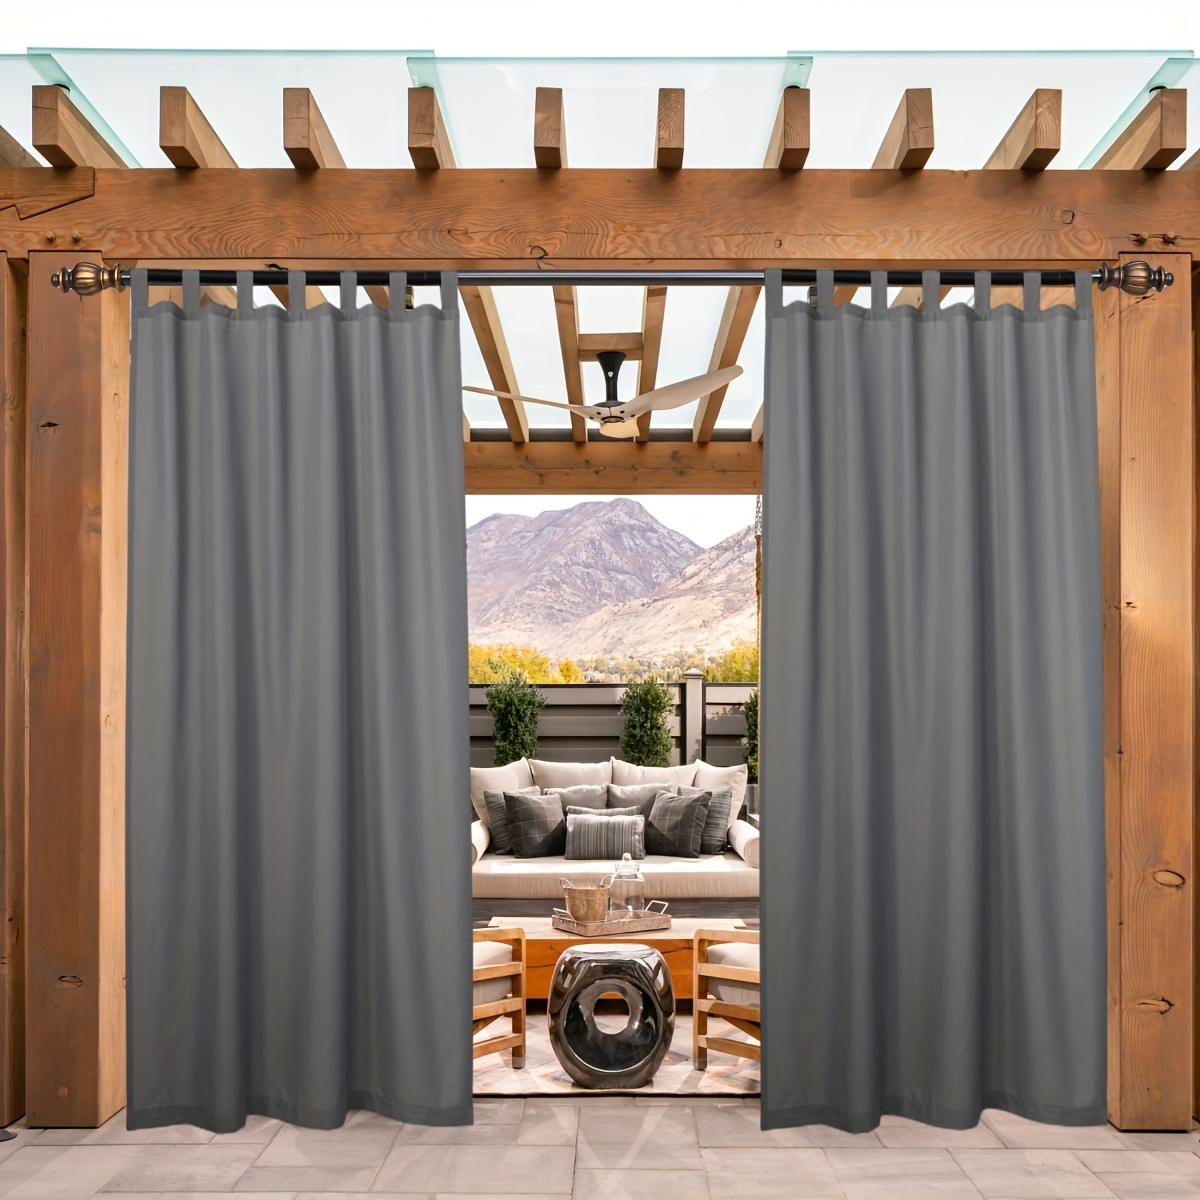 

1 Panel Wide Outdoor Curtains Blackout For Patio Waterproof, Privacy Tab Top Outside Curtains For Porch, Pergola, Cabana, Gazebo, Deck